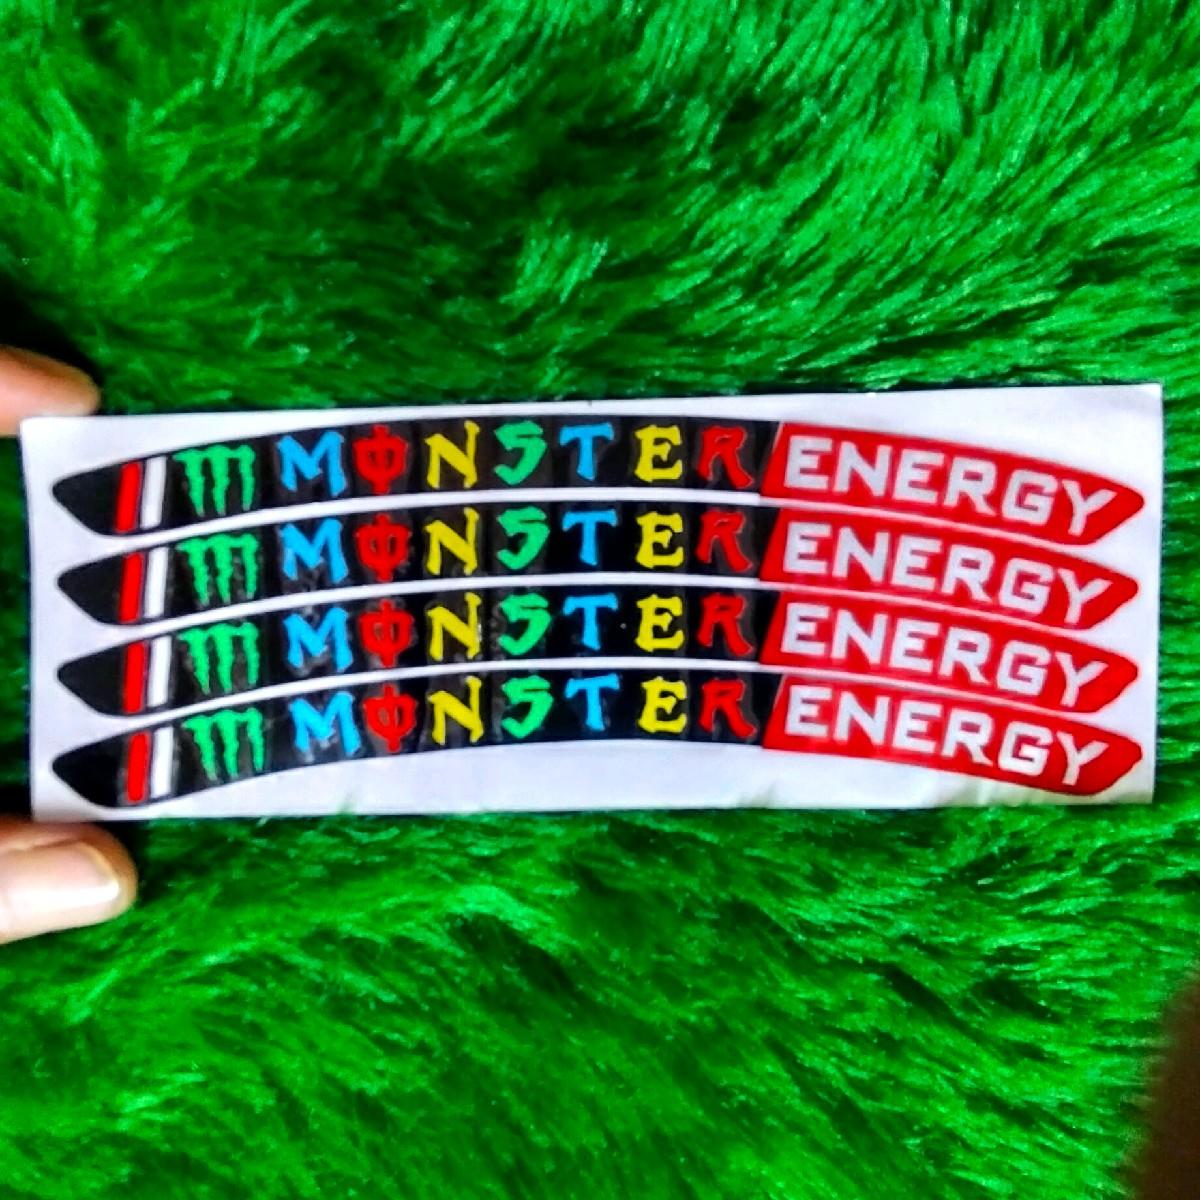 SILICON BRACELETS LOT of 5 Monster Energy limited edition promotional item  New! $13.20 - PicClick